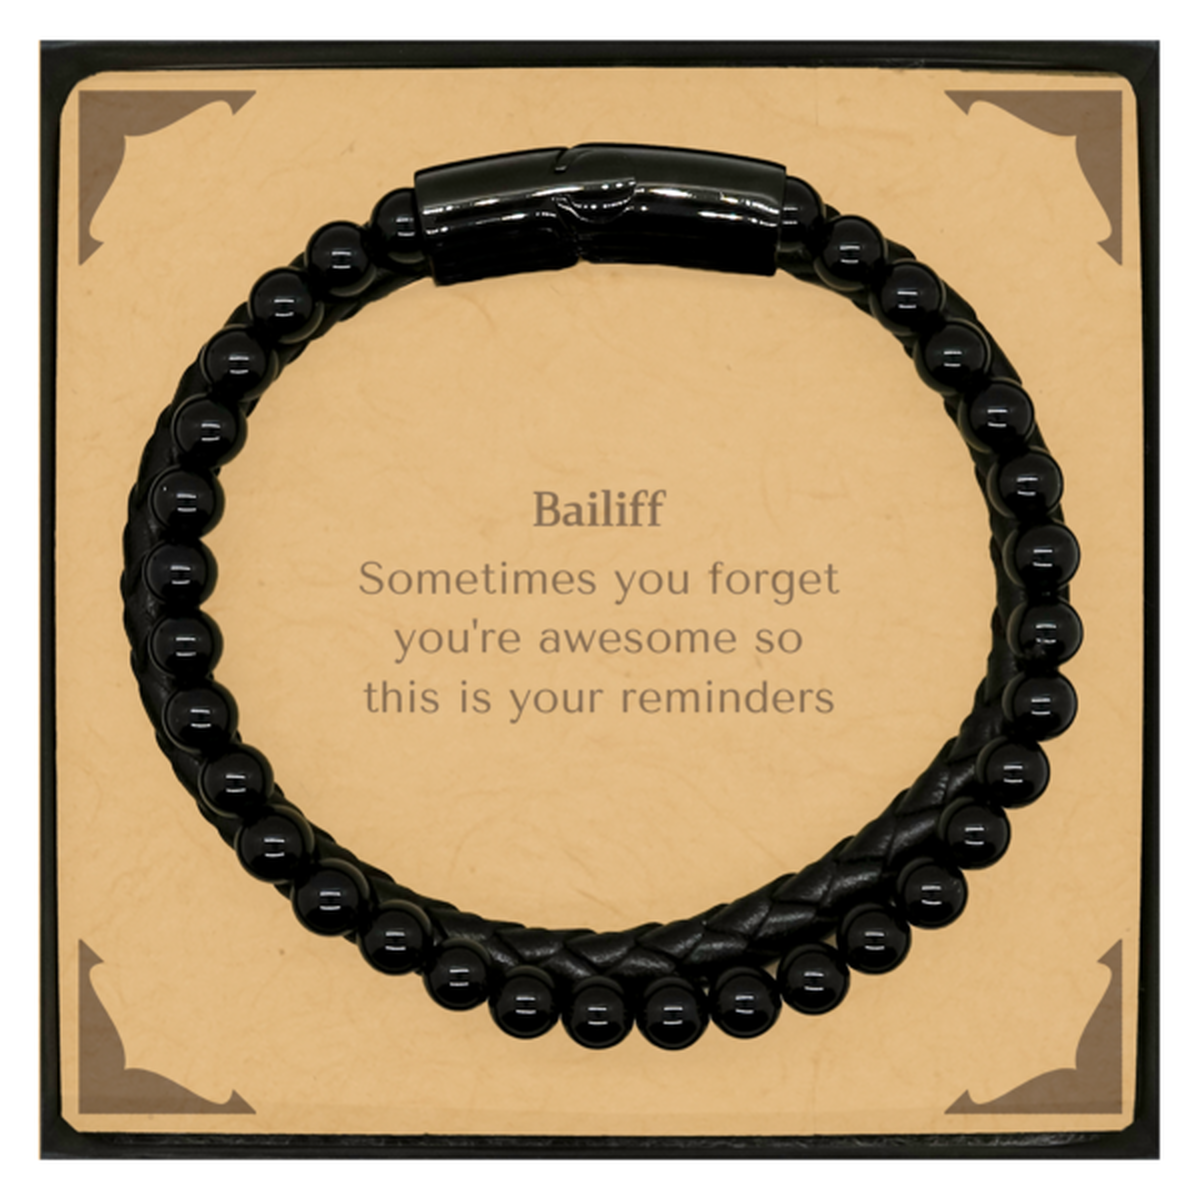 Sentimental Bailiff Stone Leather Bracelets, Bailiff Sometimes you forget you're awesome so this is your reminders, Graduation Christmas Birthday Gifts for Bailiff, Men, Women, Coworkers